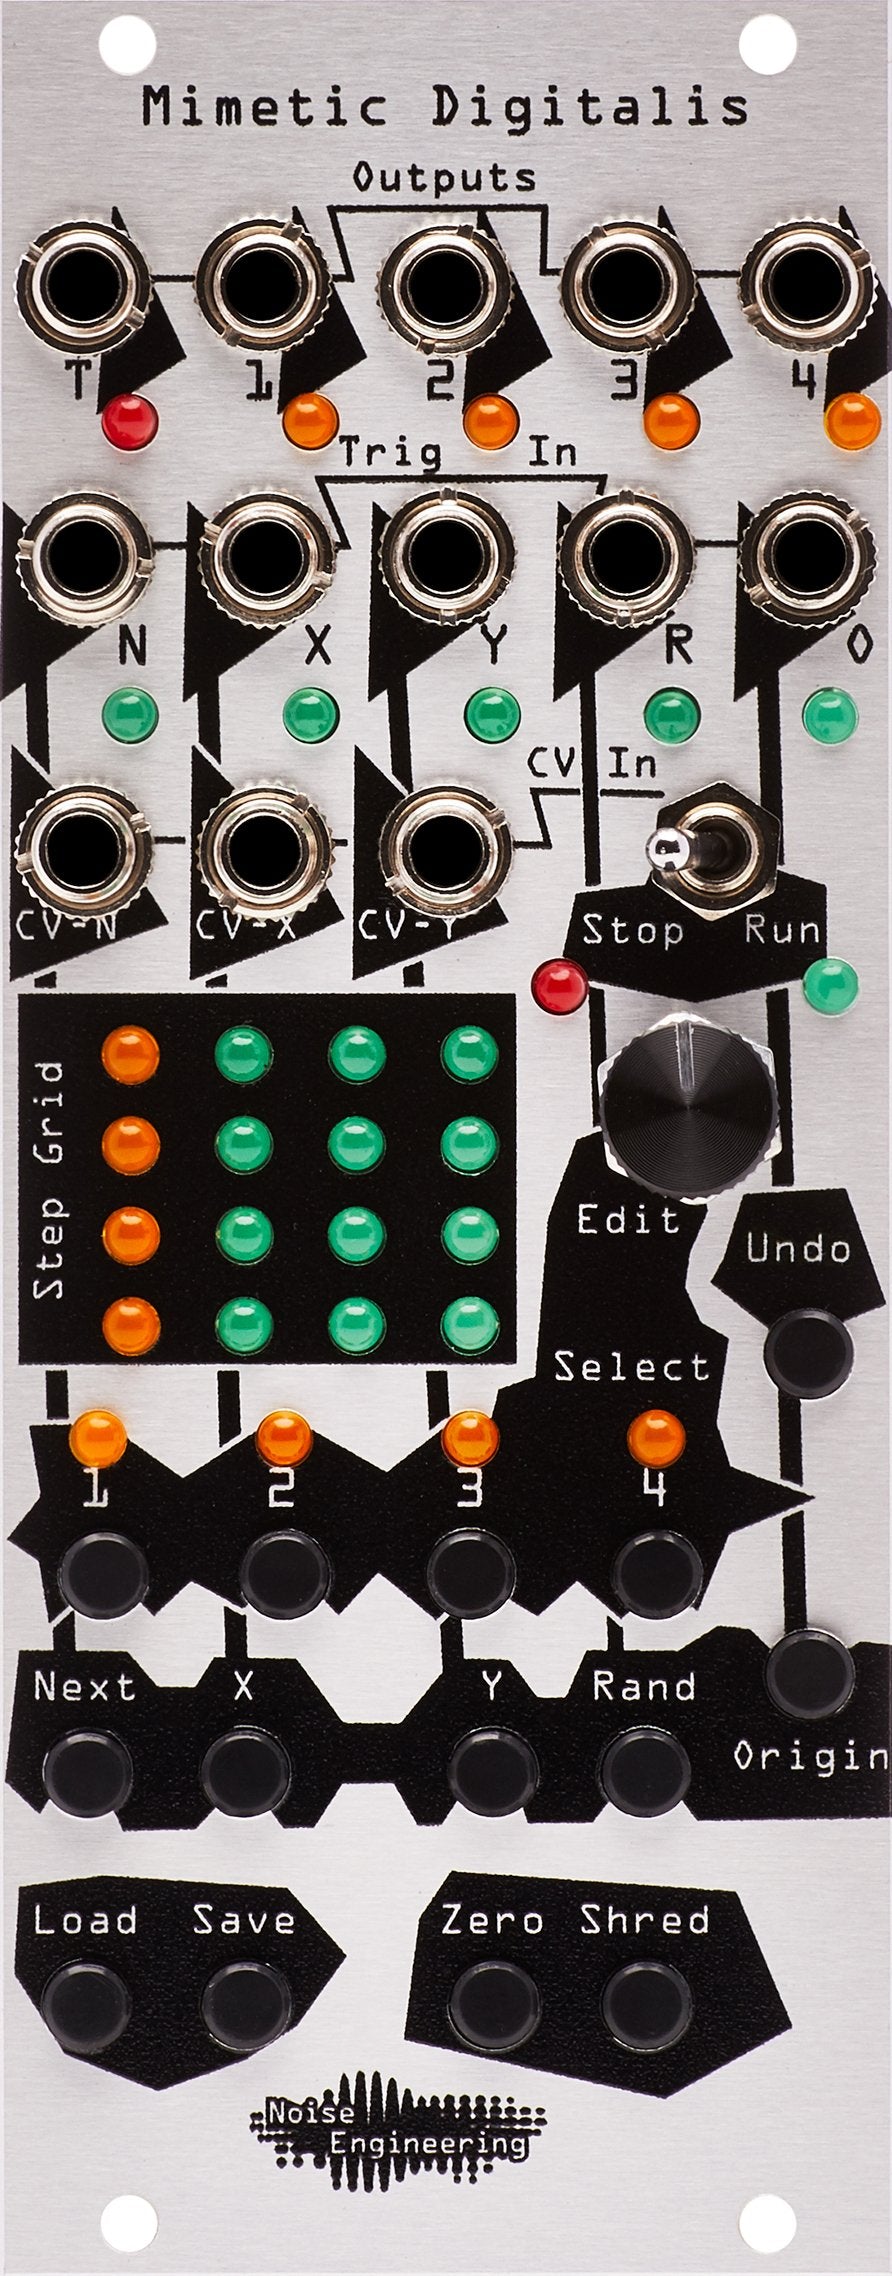 The Mimetic Digitalis module front panel, in silver with black graphics and knobs and LEDs.